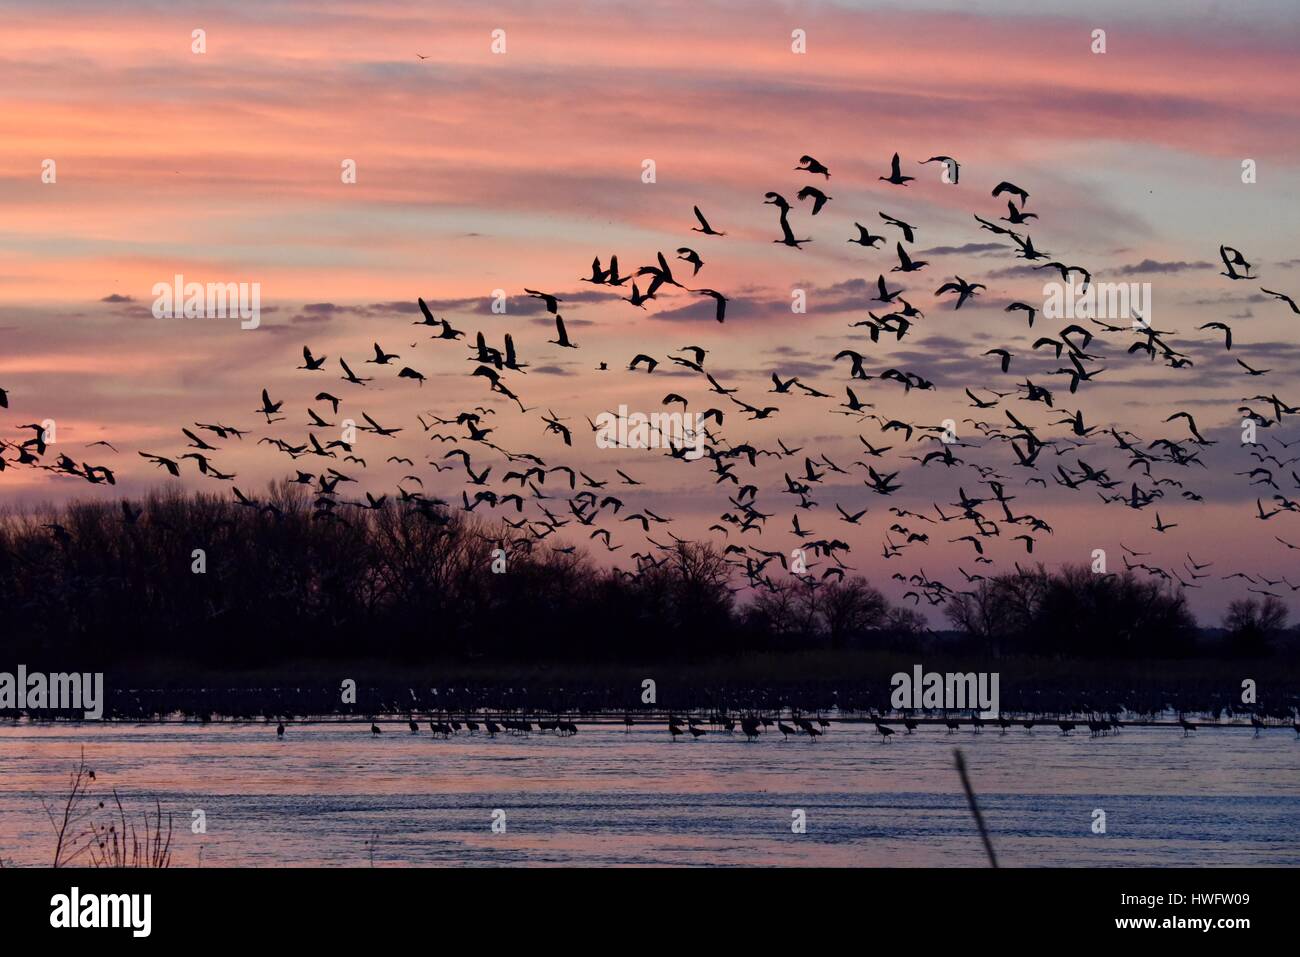 Wood River, Nebraska, USA,  20th March, 2017. Among the world's great animal migrations, the Sandhill Cranes awake and take off at property managed by the Crane Trust, Wood River, Nebraska. The spring migration population of sandhill cranes in the Central Nebraska Flyway is estimated at 650,000. More than 80 percent of the world's population of sandhill cranes converge on Nebraska's Platte River valley, a critical sliver of threatened habitat in North America's Central Flyway. Credit: John D. Ivanko/Alamy Live News Stock Photo